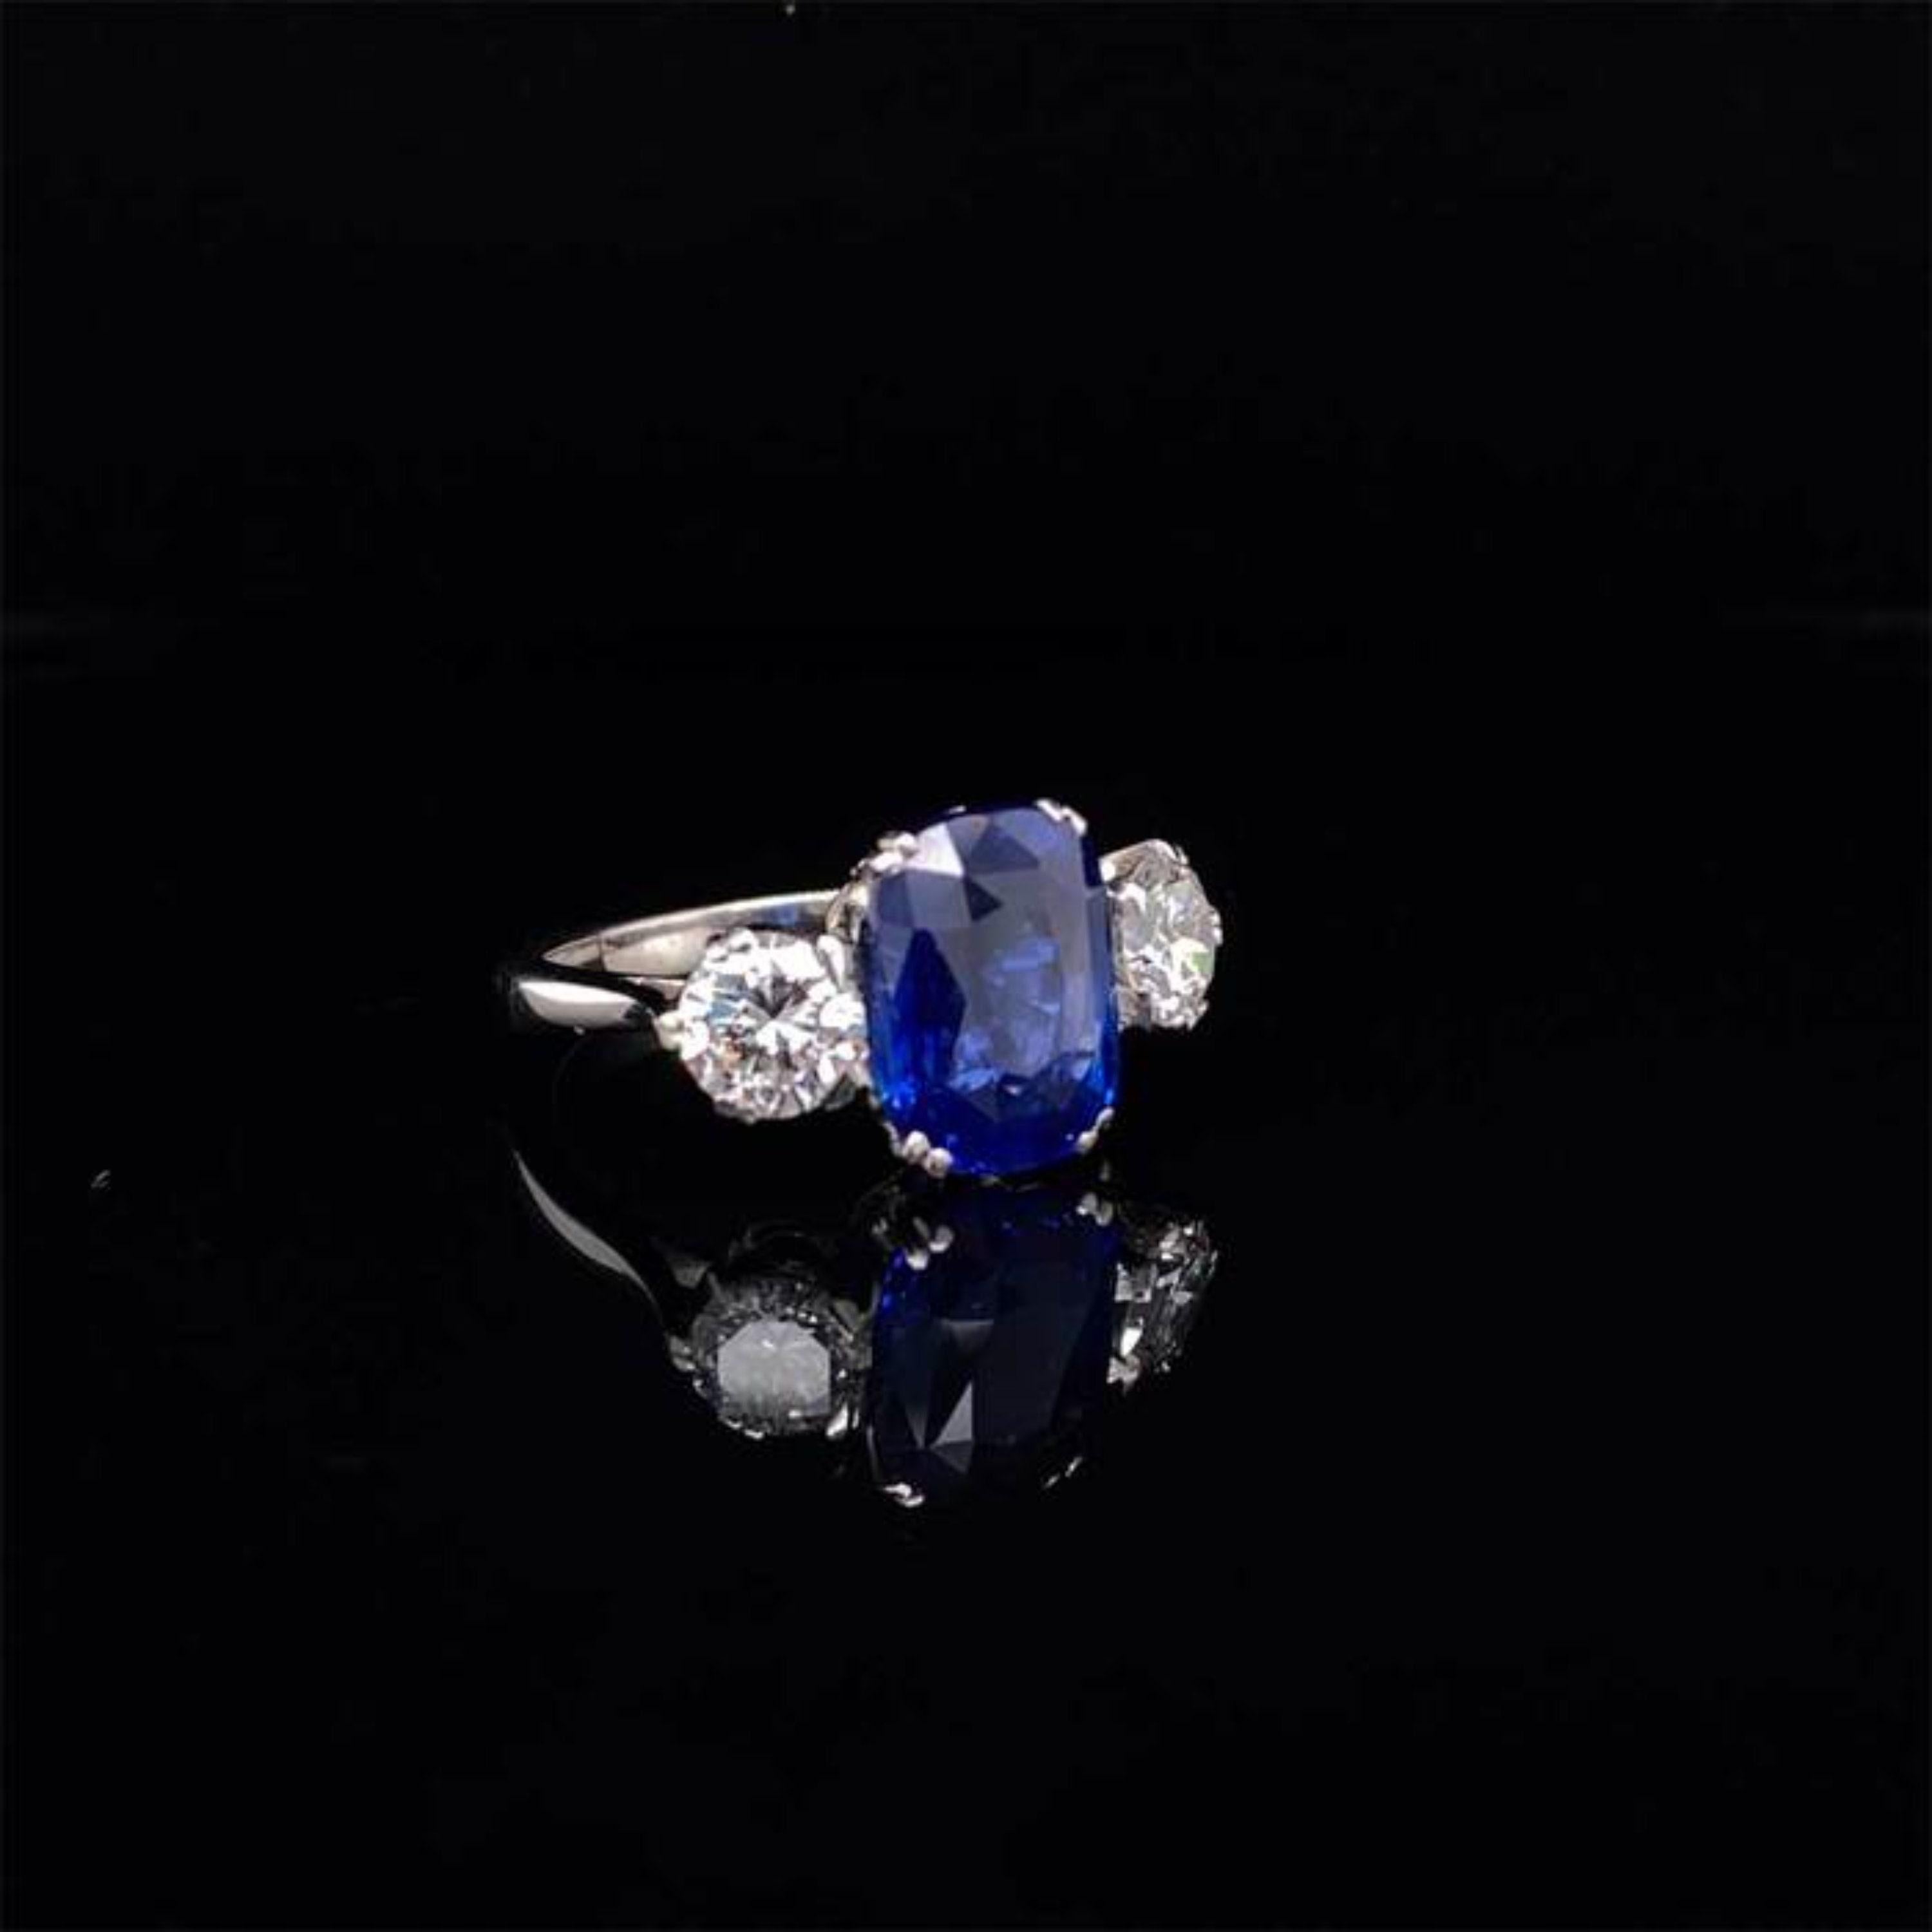 For Sale:  3 Carat Natural Sapphire Diamond Engagement Ring Set in 18K Gold, Cocktail Ring 3